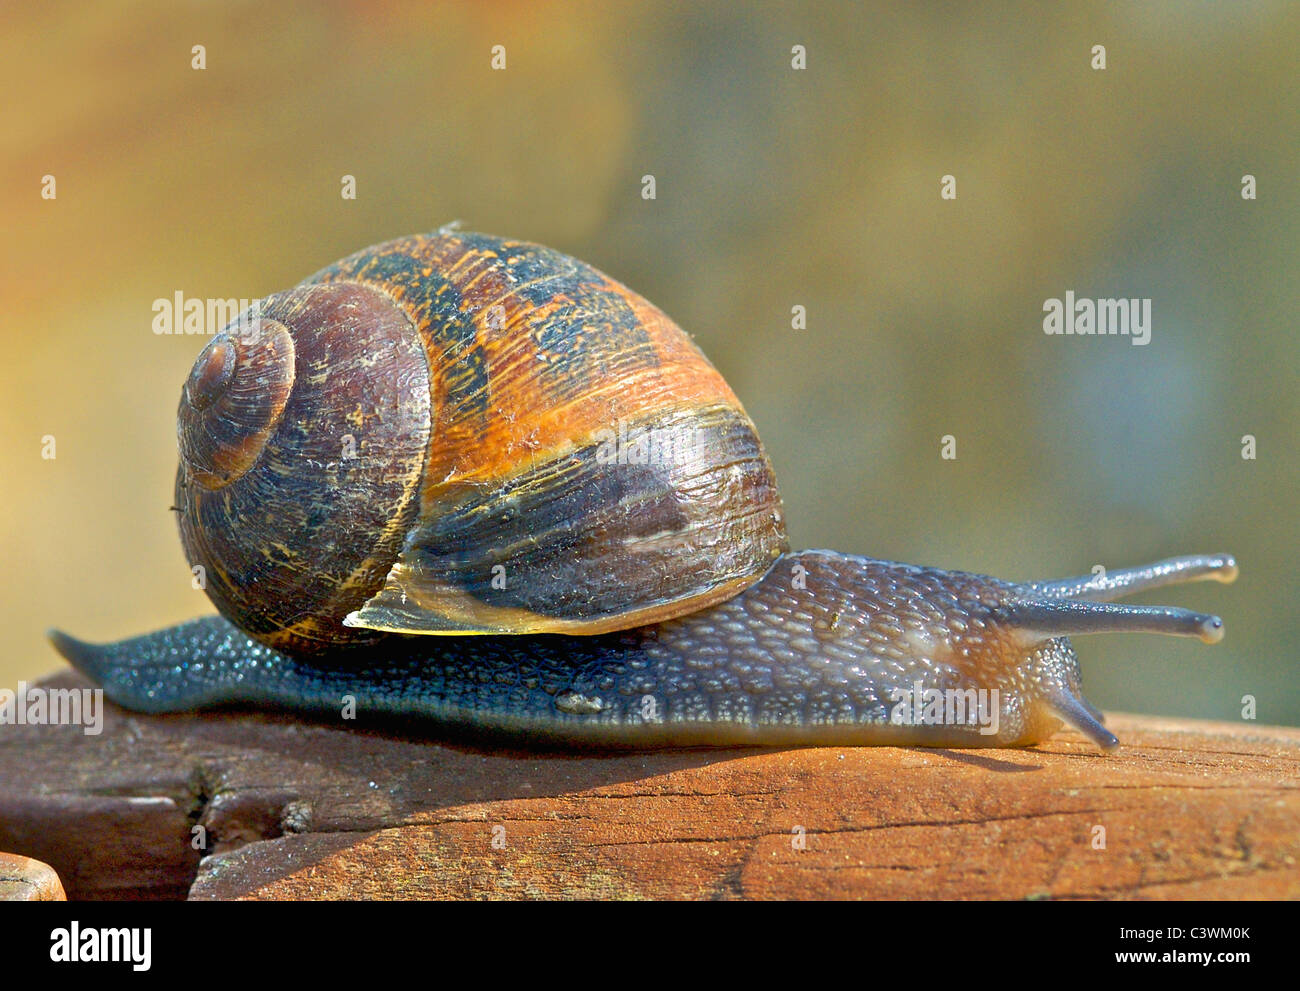 Helix aspersa, known by the common name garden snail, is a species of land snail, a pulmonate gastropod Stock Photo